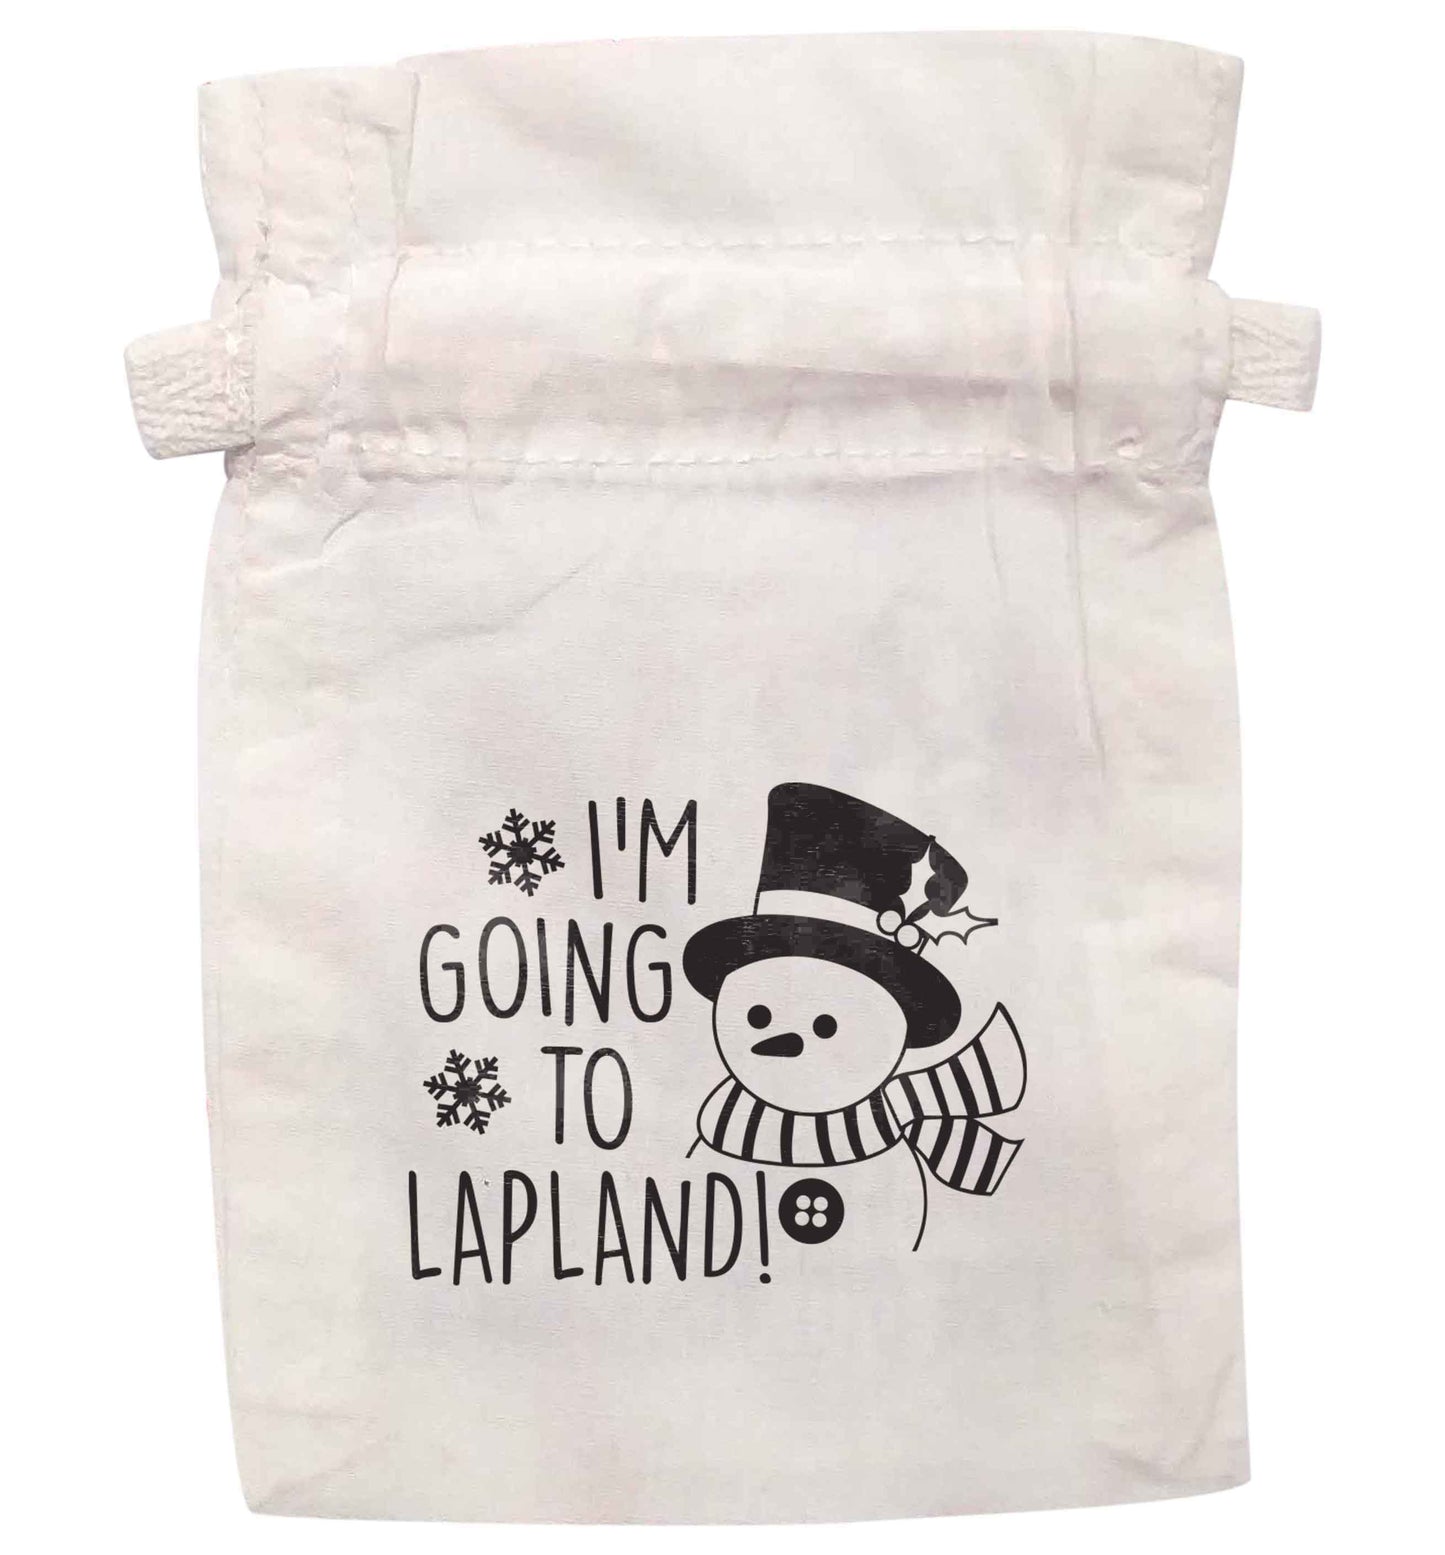 I'm going to Lapland | XS - L | Pouch / Drawstring bag / Sack | Organic Cotton | Bulk discounts available!